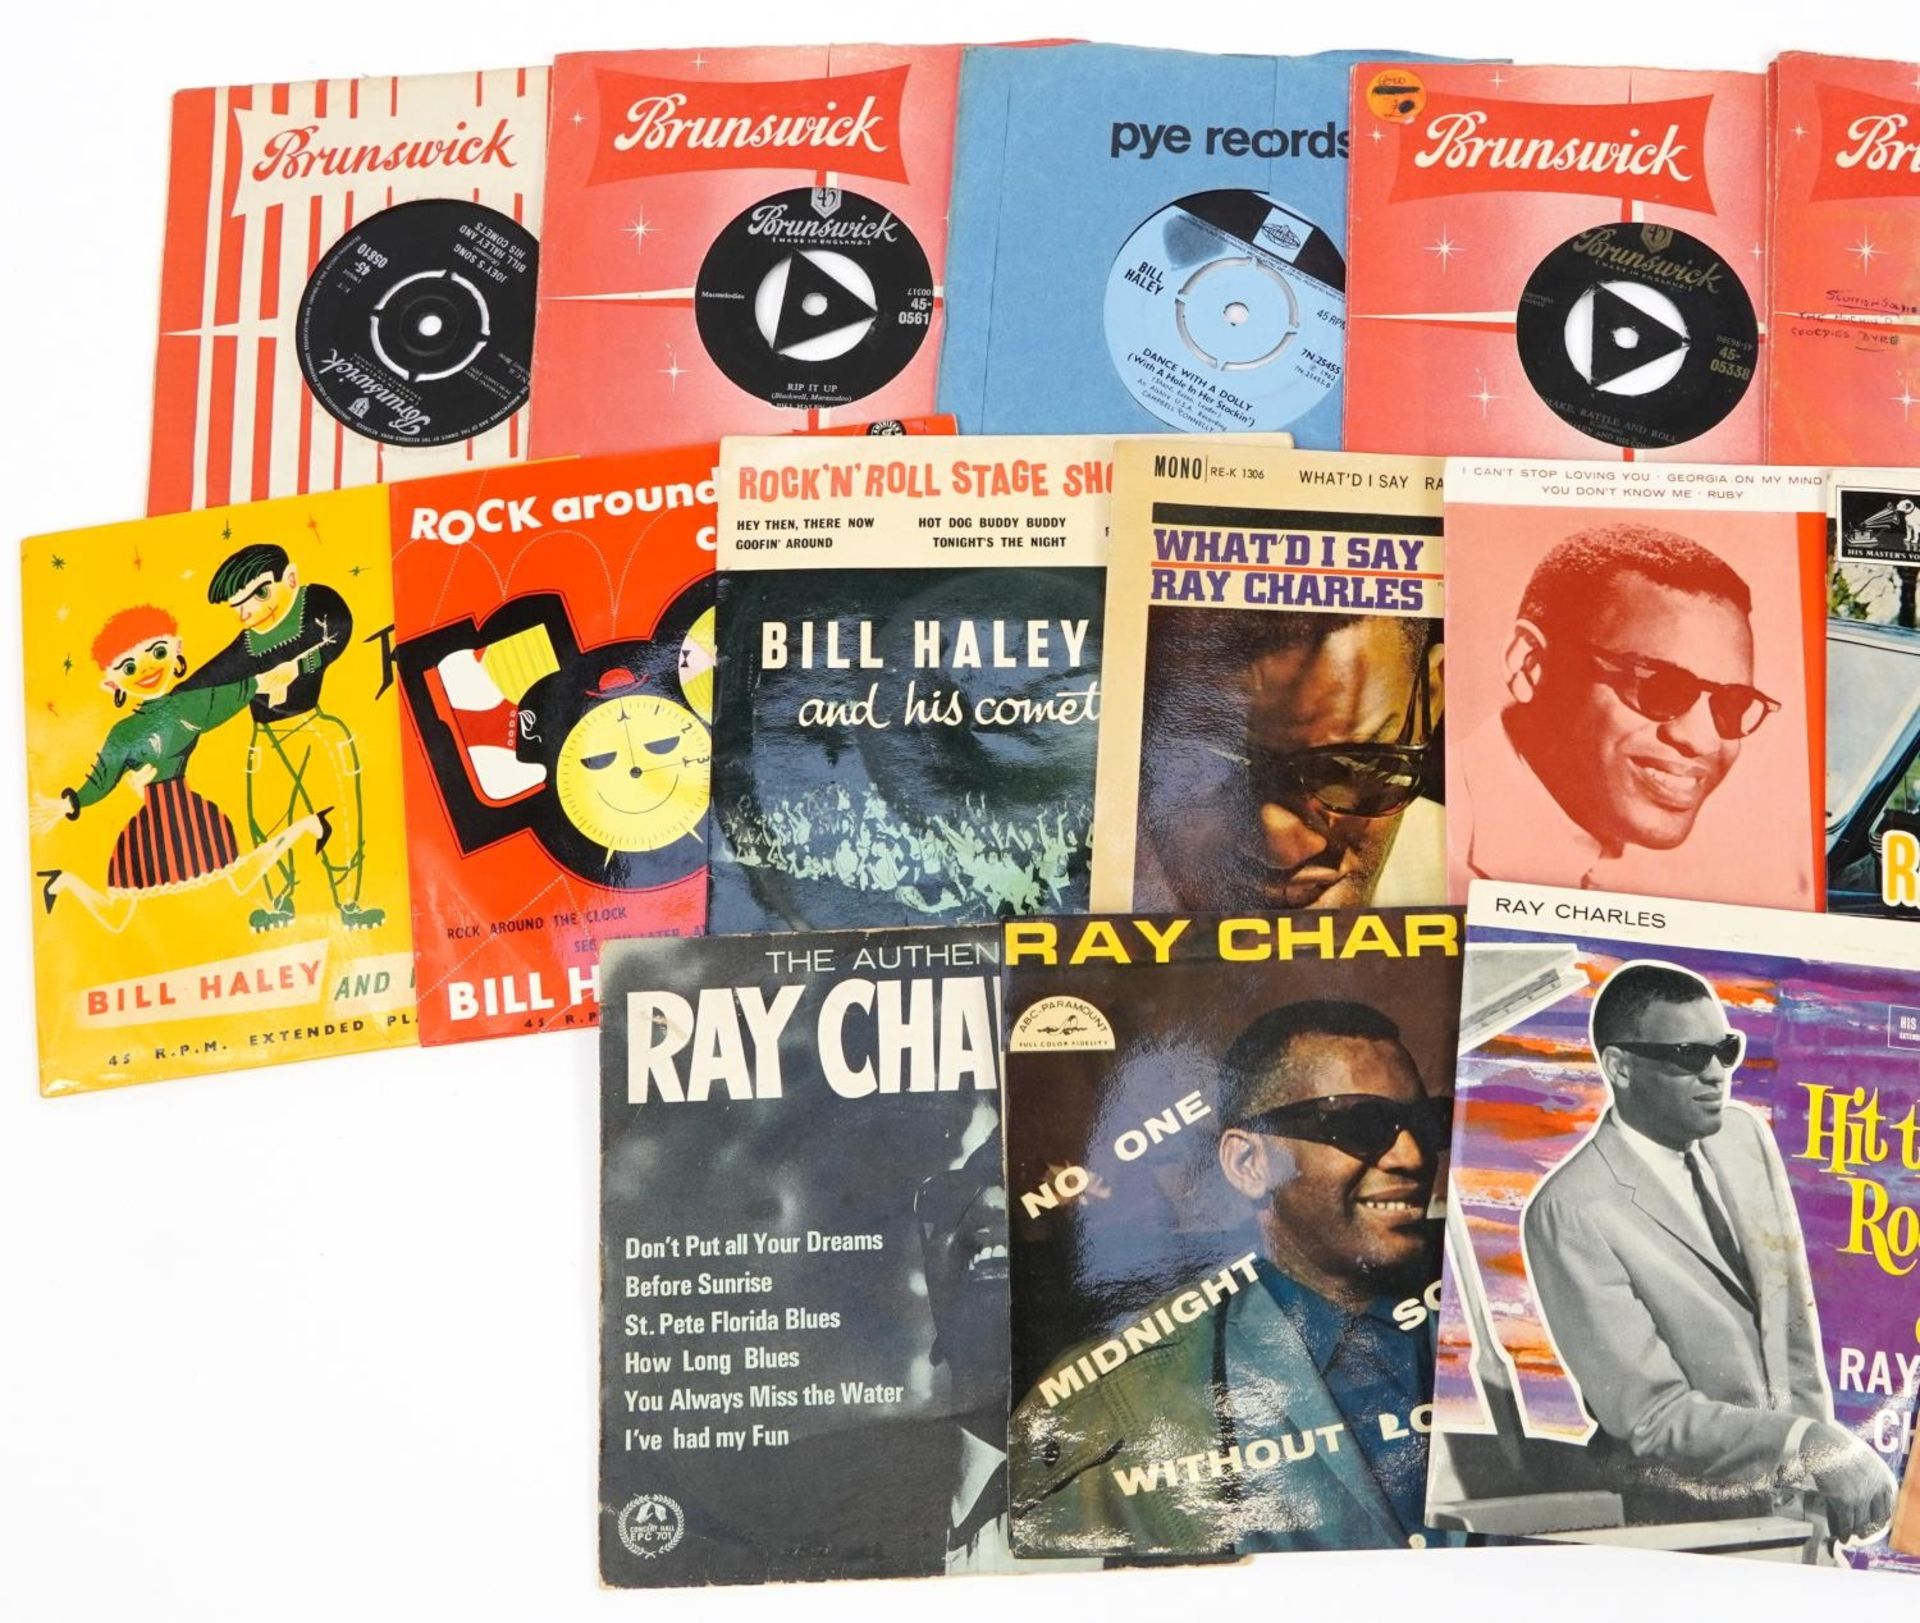 45rpm records including Ray Charles and Bill Halley and his Comets - Image 2 of 3